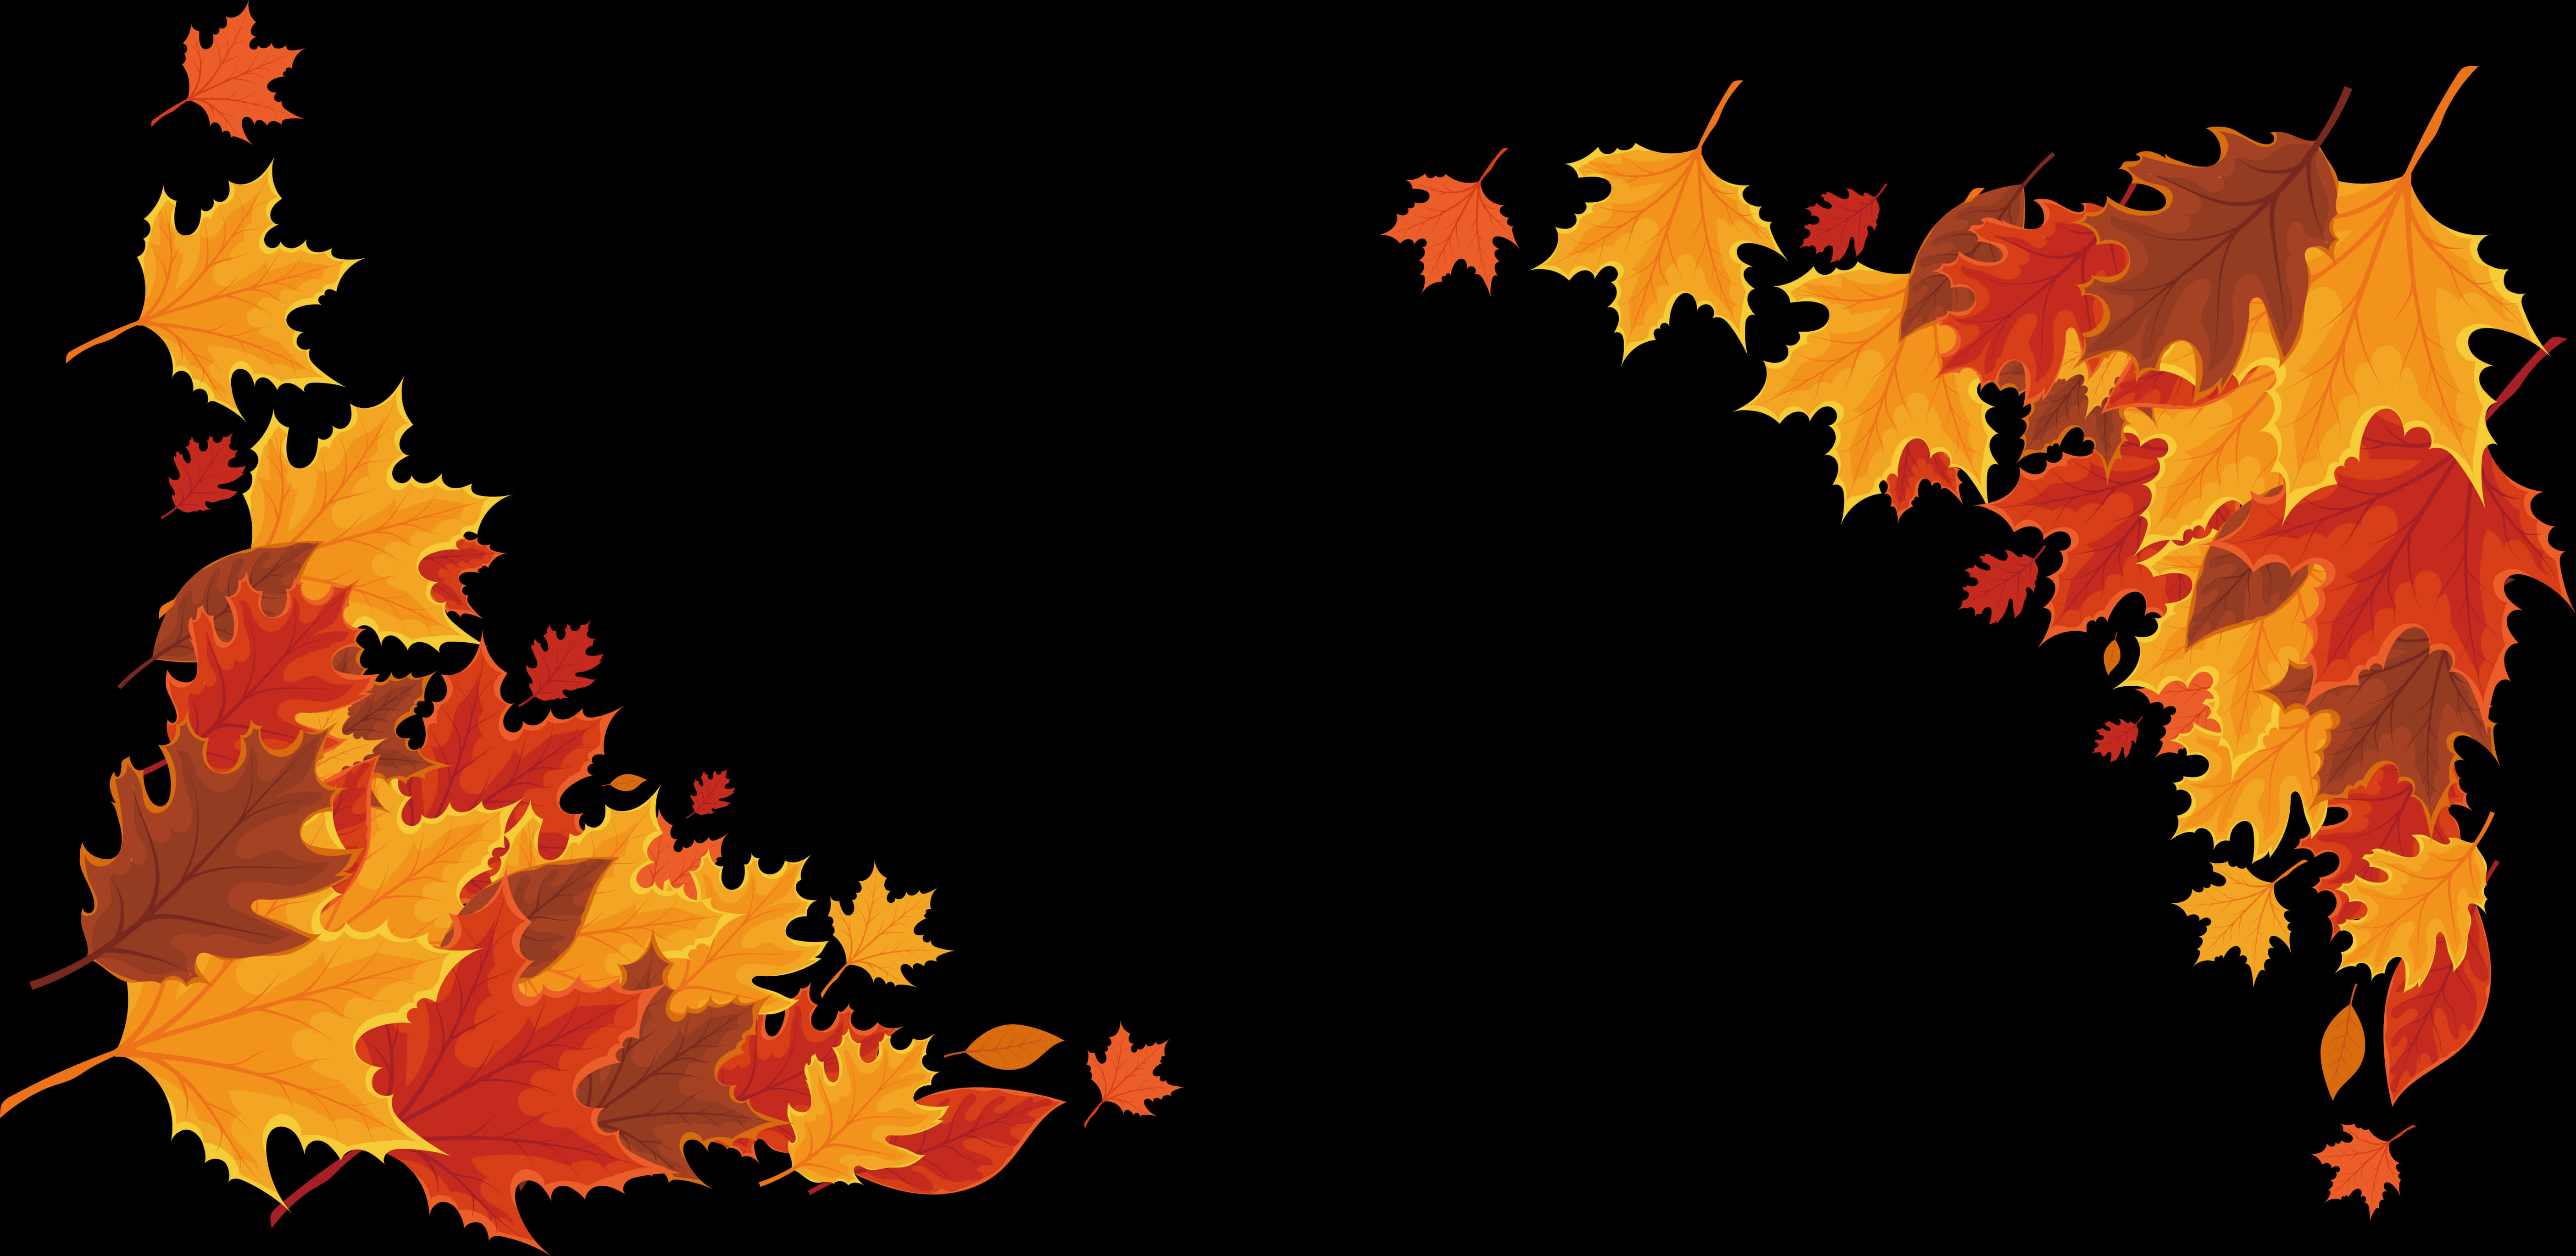 Autumn Leaves Frame Clipart PNG image